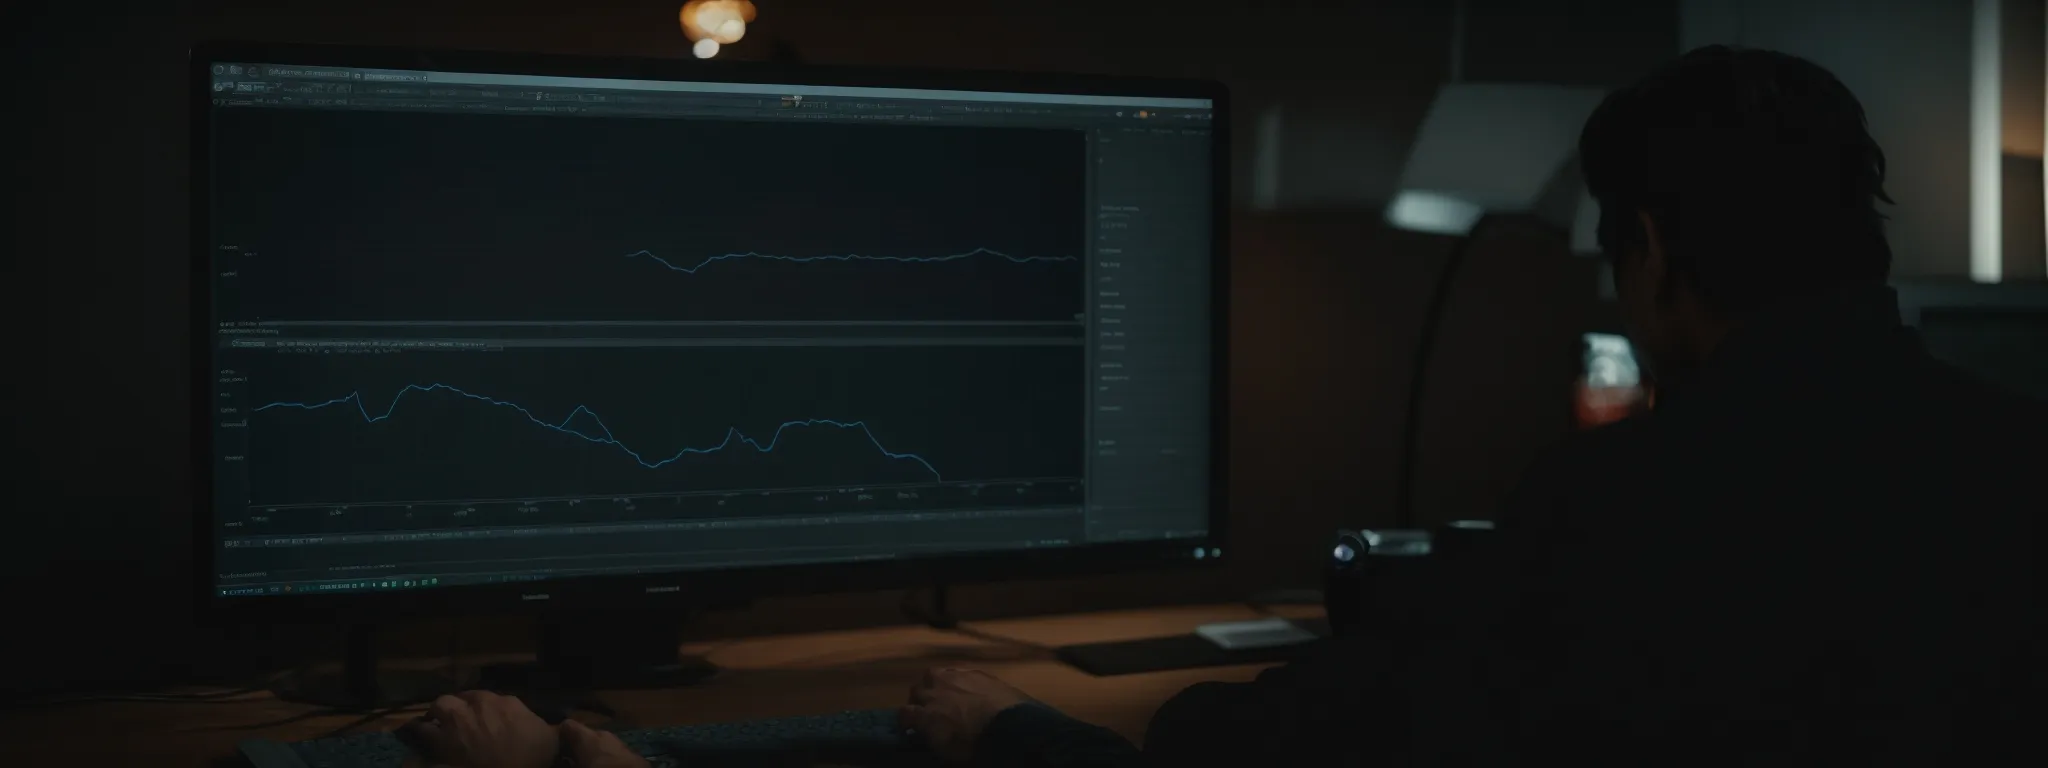 a person analyzes a rising graph on a computer screen, symbolizing increasing conversion rates due to seo efforts.